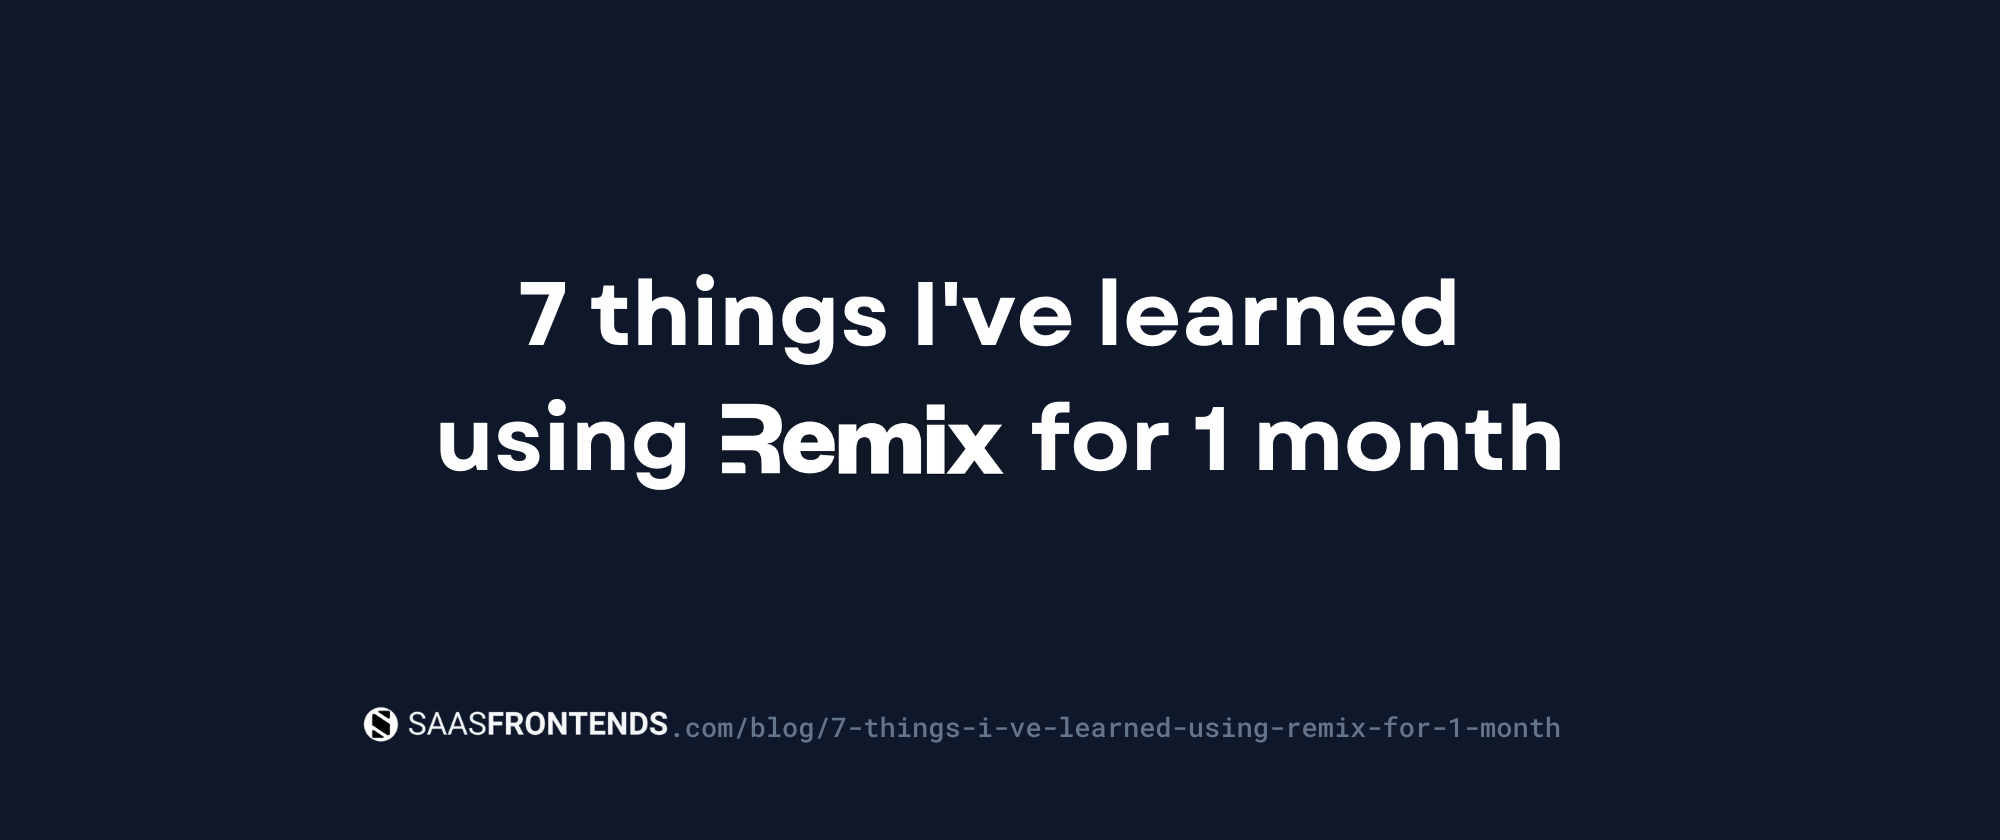 Remix learnings after 1 month